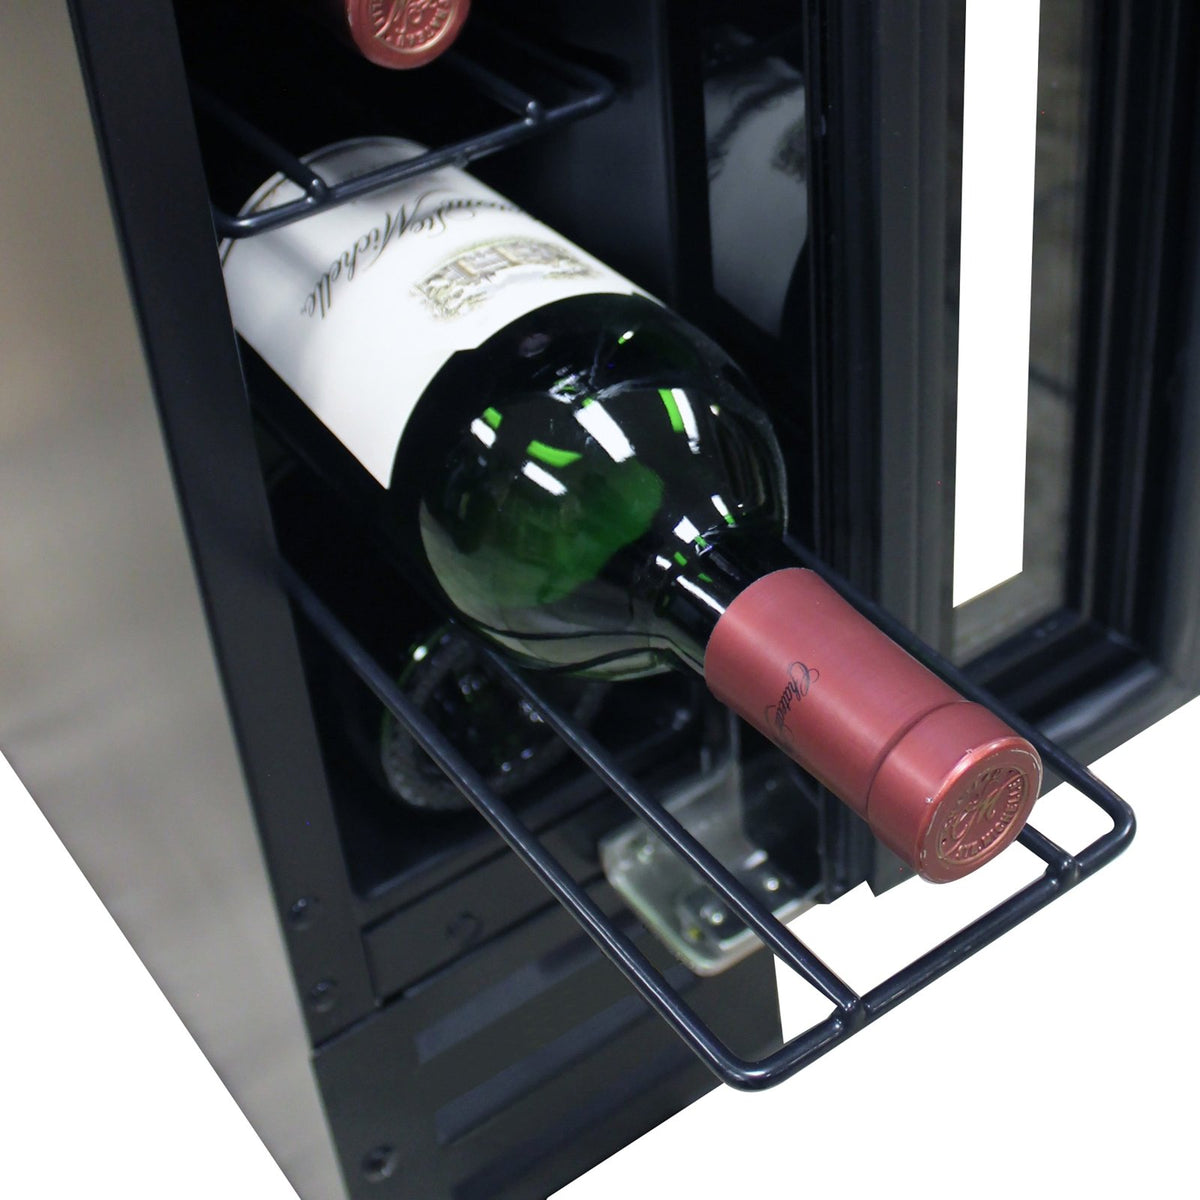 Vinotemp EL - 7TS Private Reserve Series Compact Single - Zone Wine Cooler with Touch Screen Controls, 7 Bottle Capacity, in Black (EL - 7TS - BLACK) - TheChefStore.Com